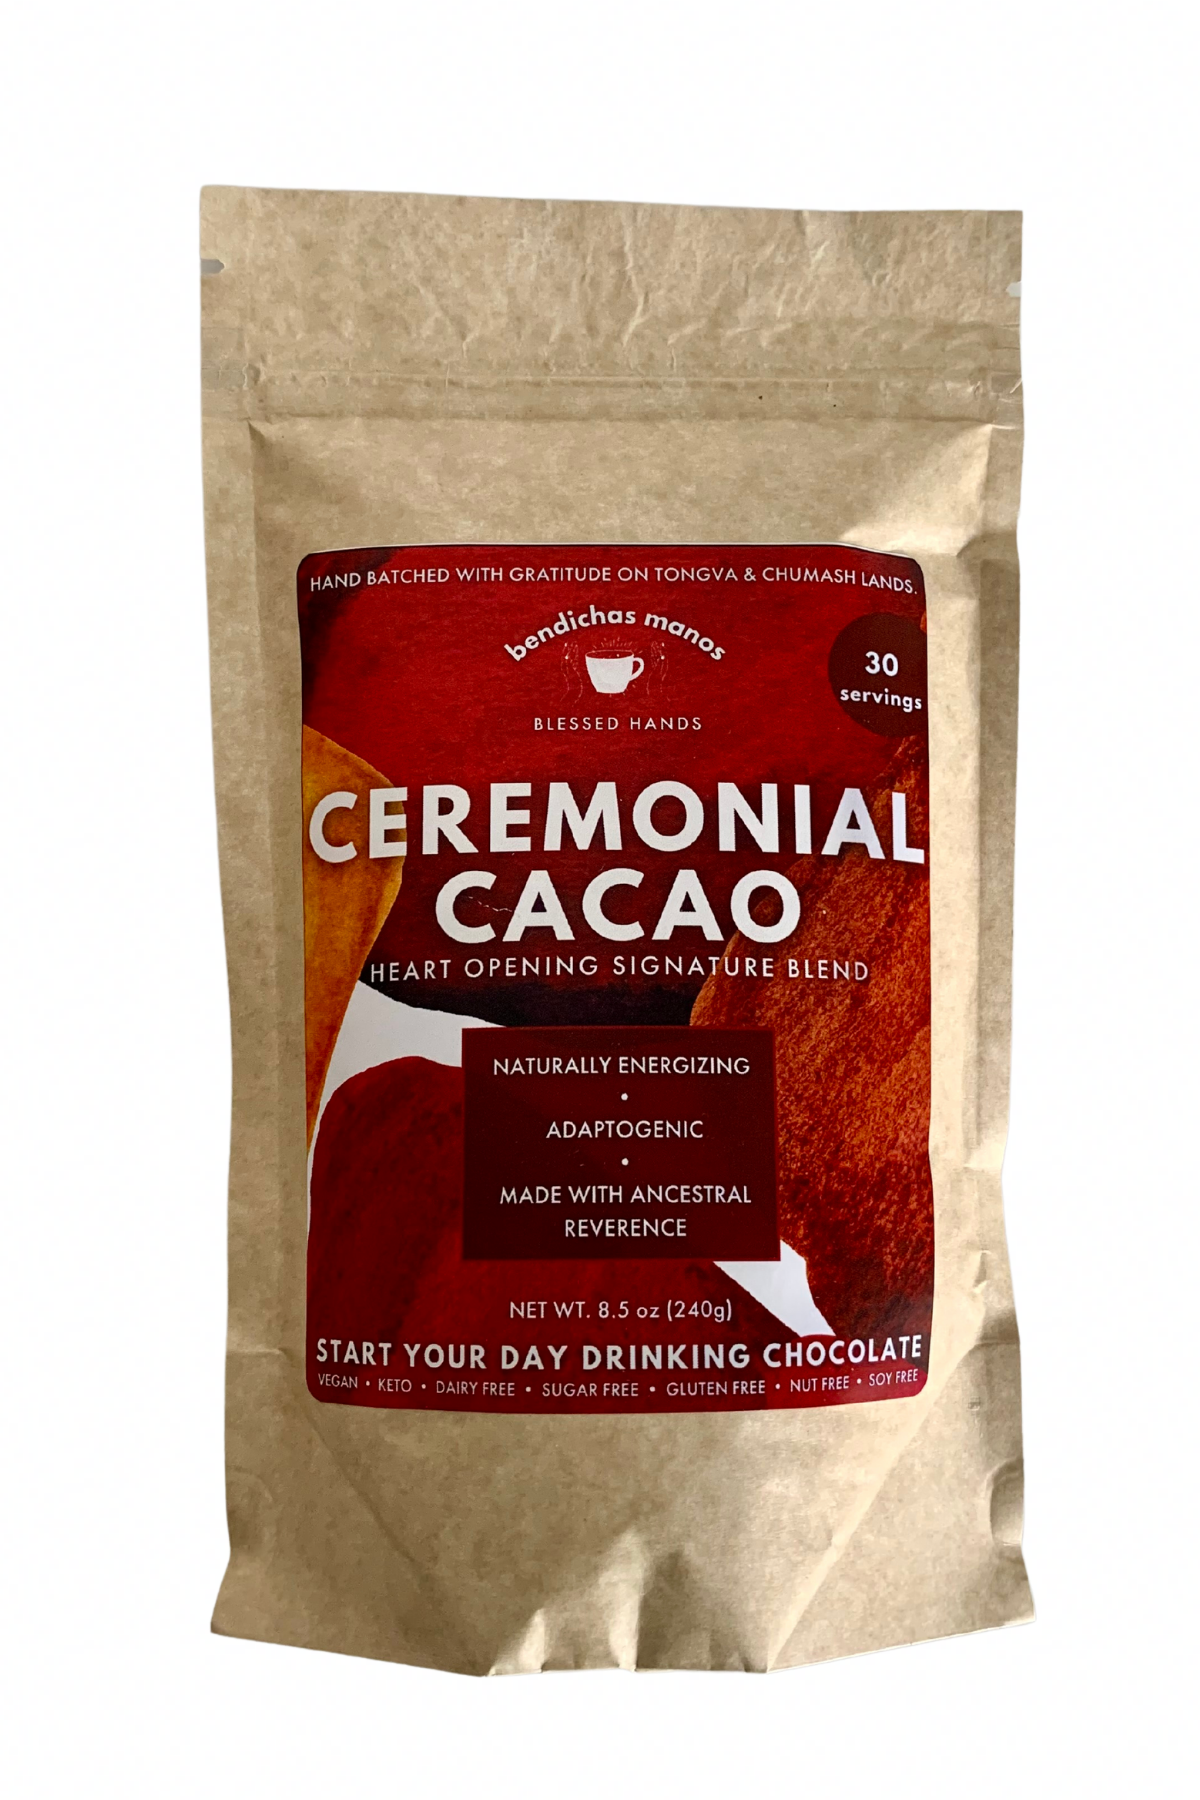 Deluxe Pack of 3 Ceremonial Cacao Signature Blend